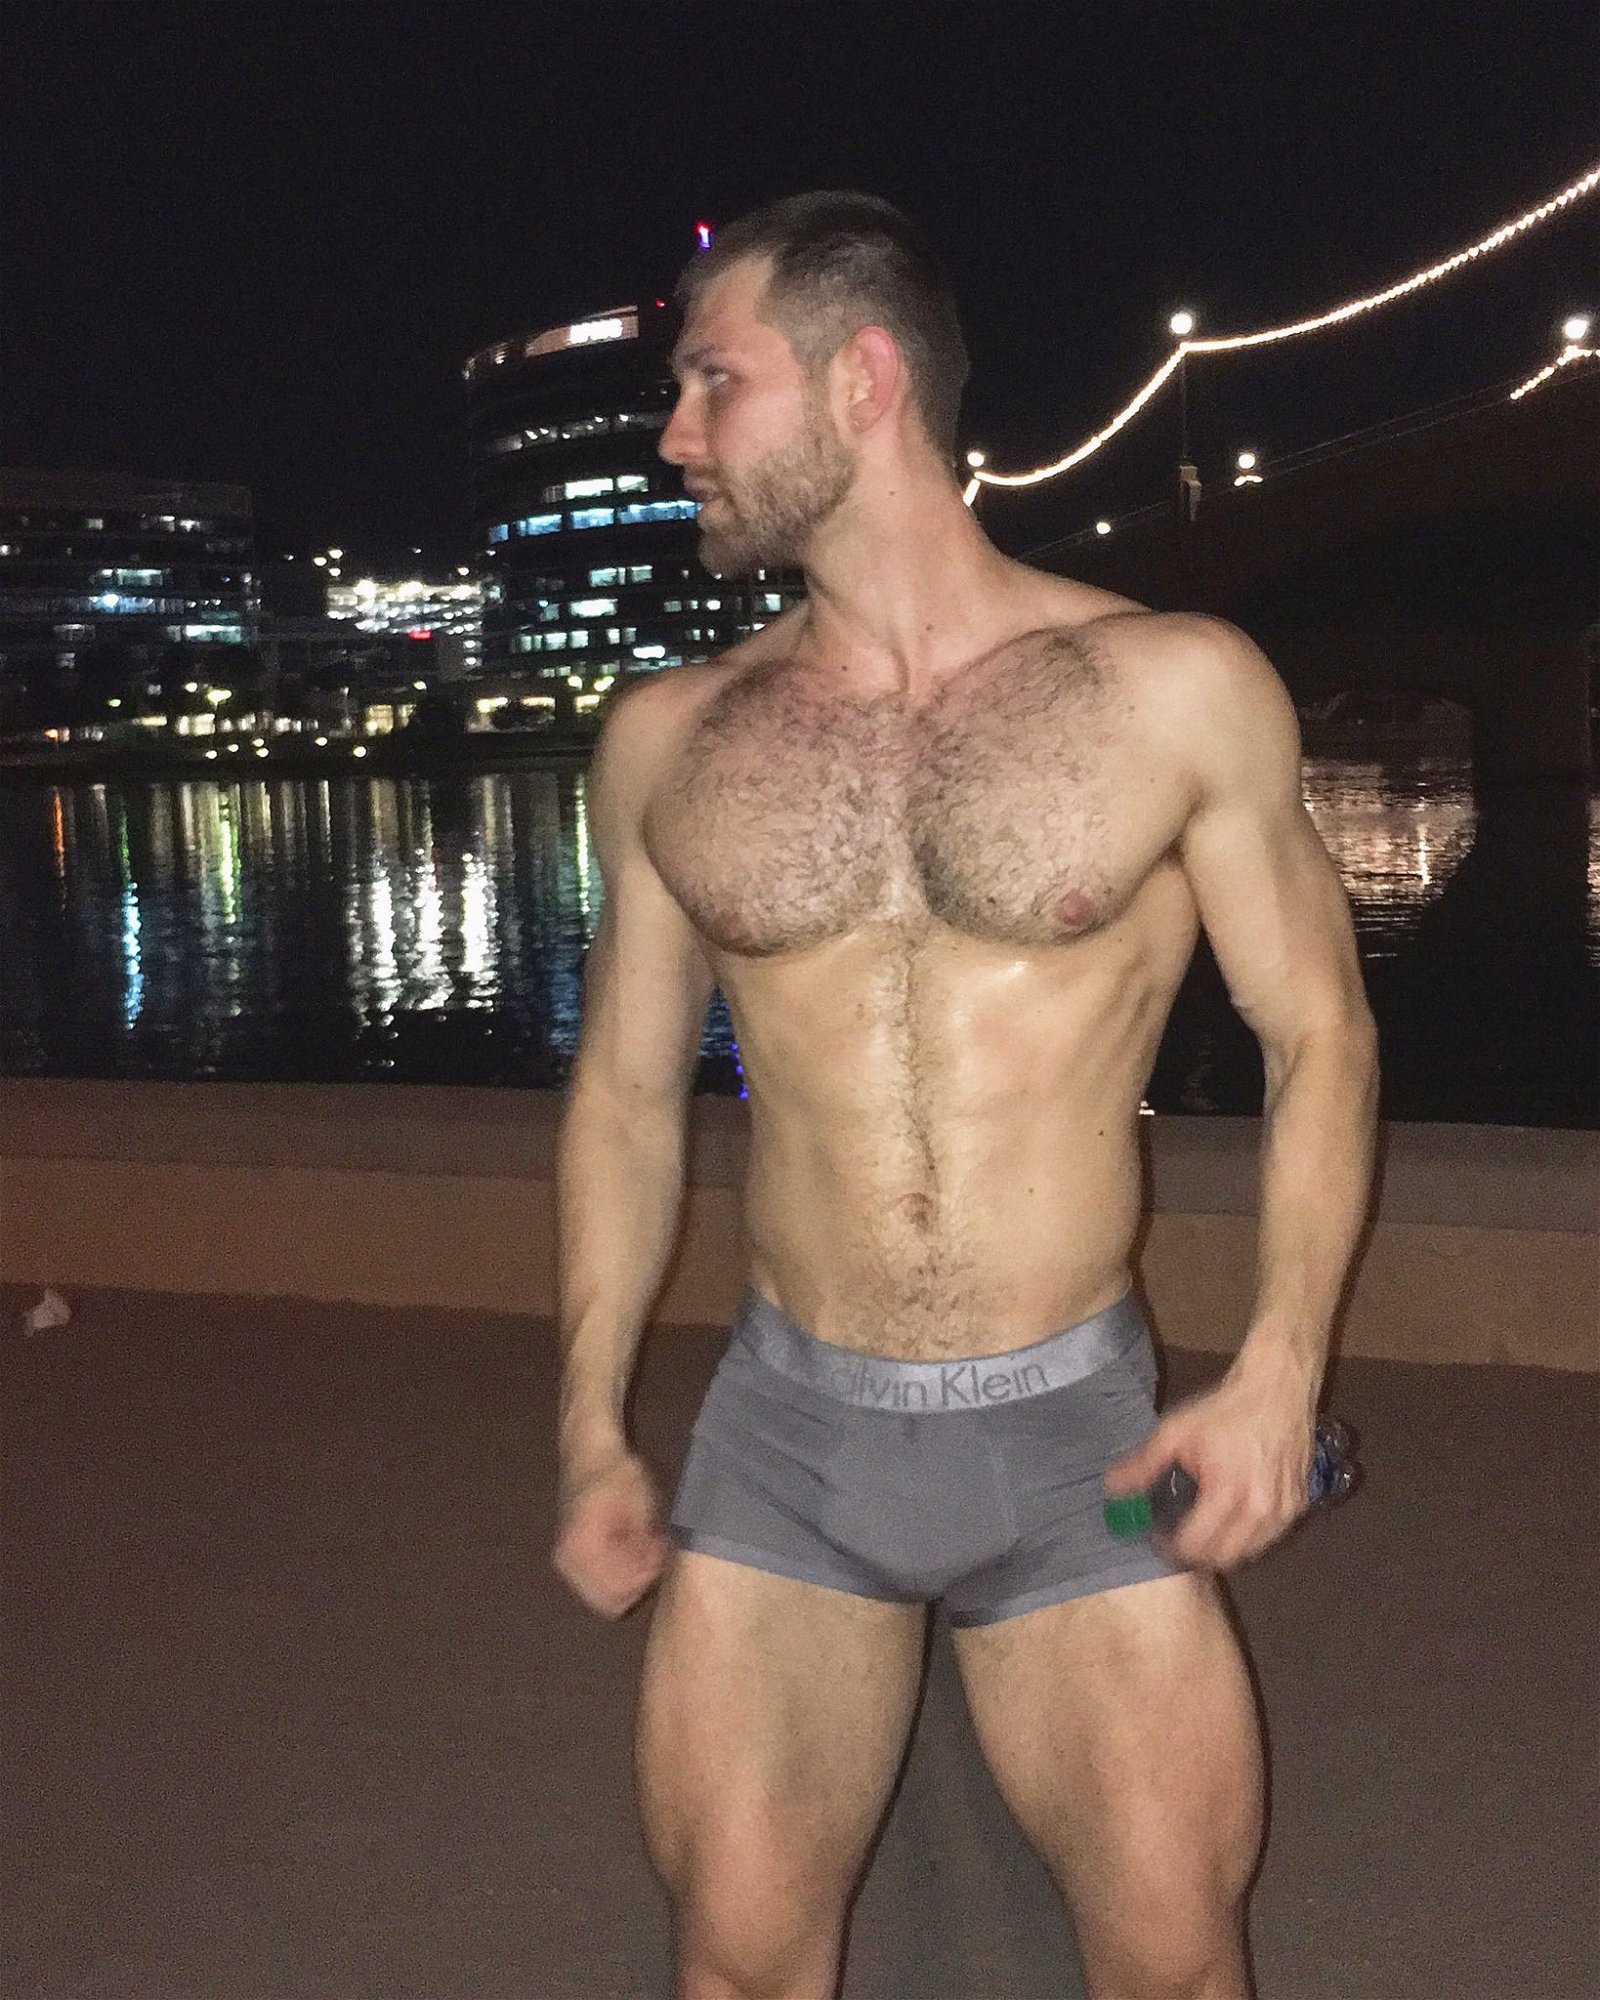 Watch the Photo by TravellingDan with the username @TravellingDan, posted on October 17, 2018 and the text says 'jockapp:

Get lucky tonighthttps://apple.co/2N1Y7zbJockBros.com #guys #fitfam #aesthetics #love #muscle #gayhunk #gay #instagay #scruff #beard #gayfollow #followme #swag #hot #gayjock #gayboy #gaylife #gayfit #bodybuilder #jockstrap #fitnessmodel..'